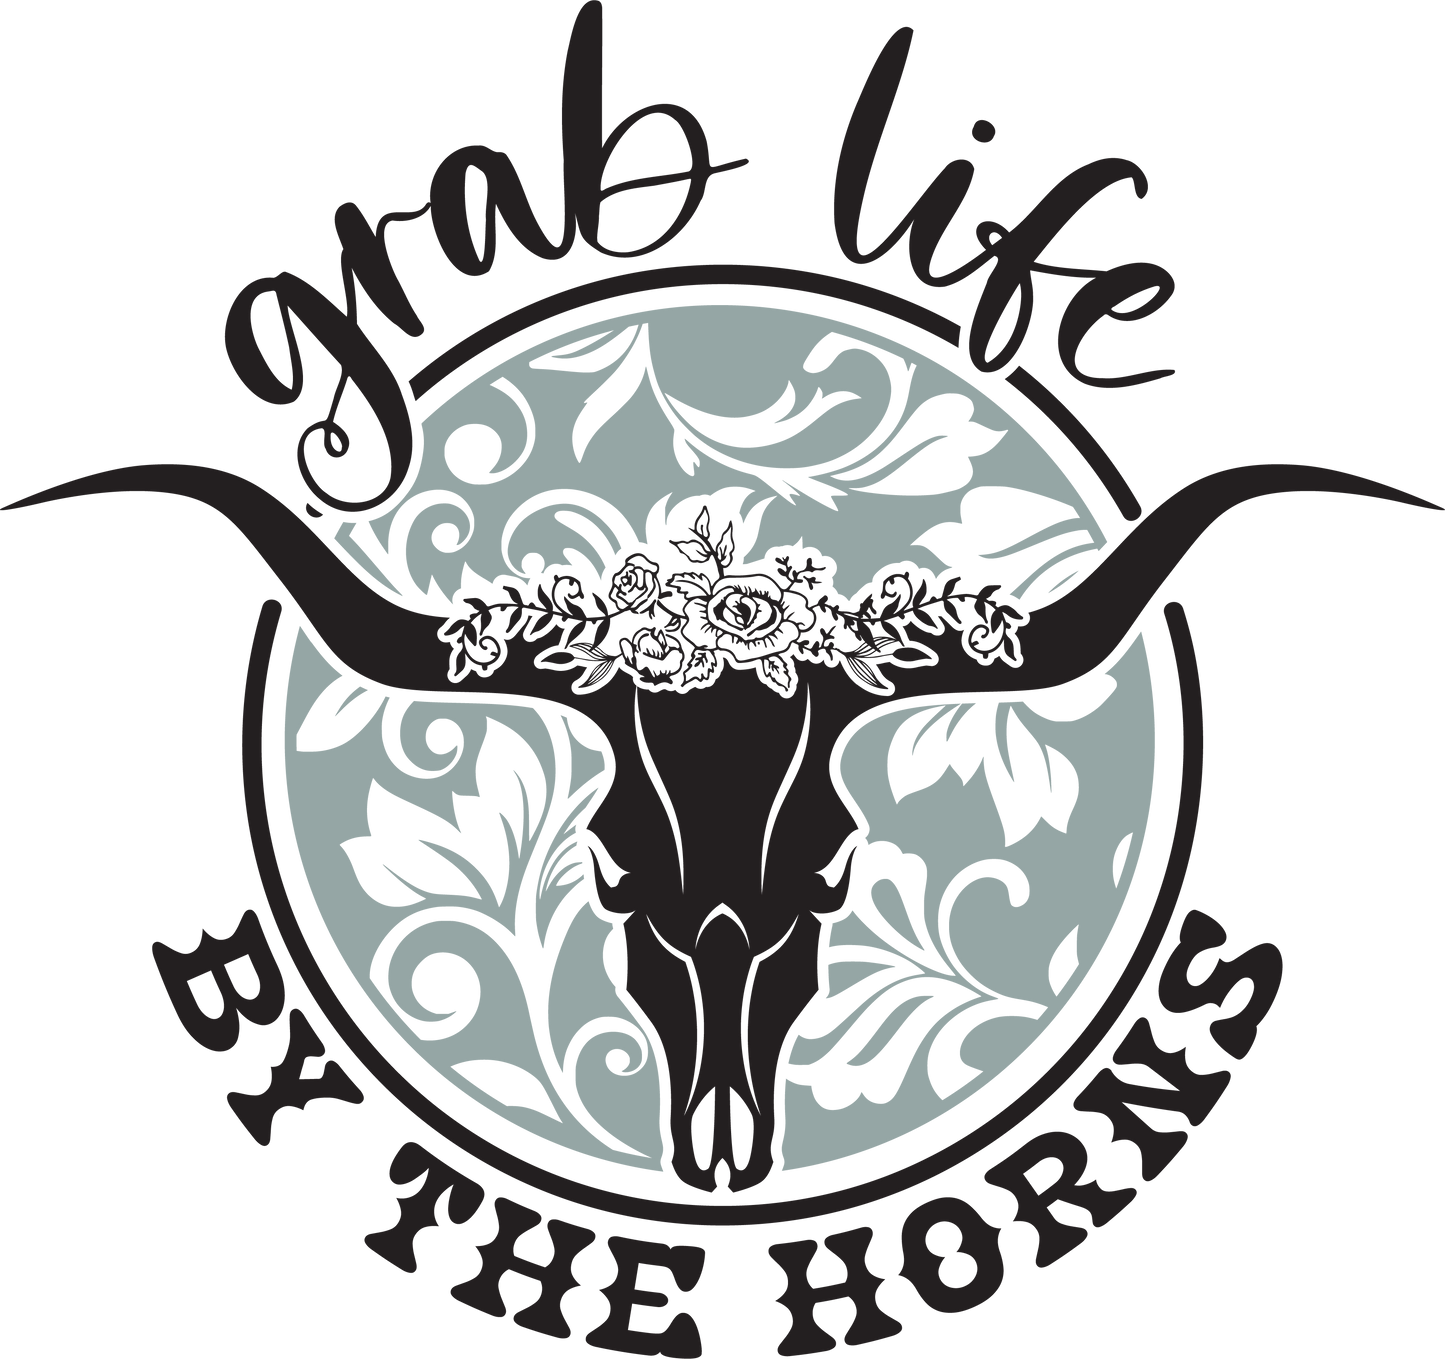 Grab life by the horns